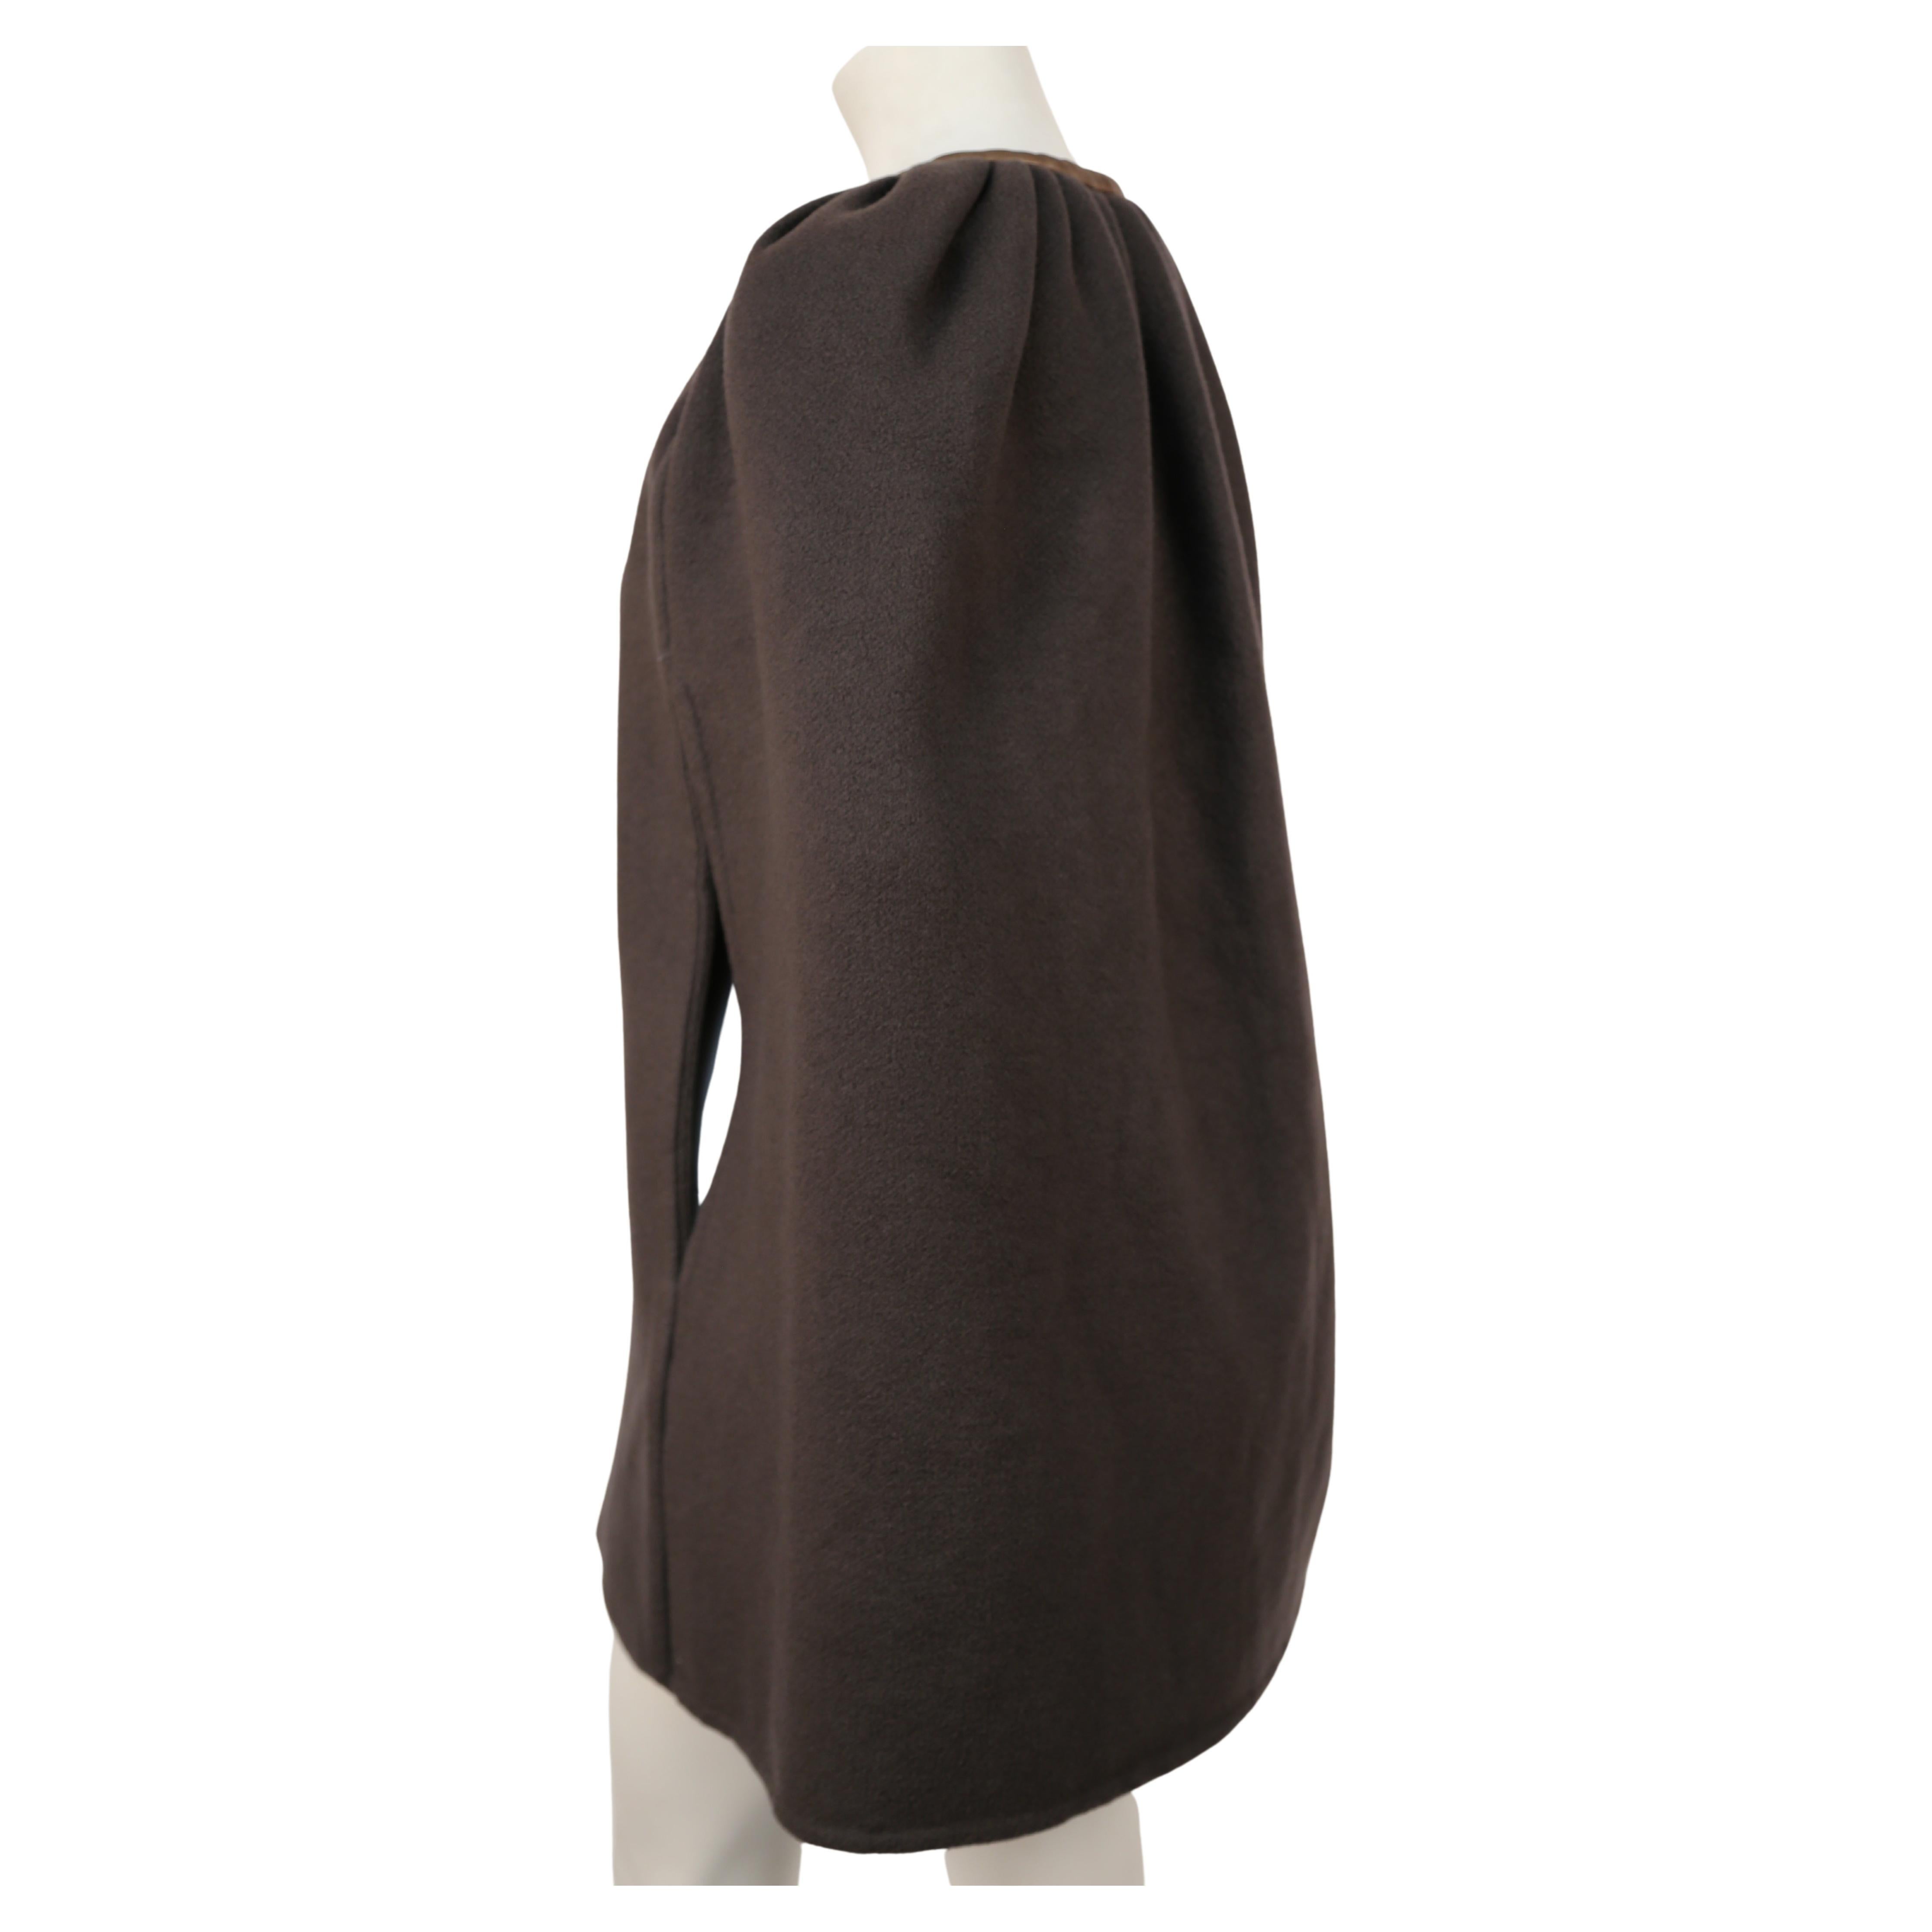 Incredibly soft, taupe cashmere cape with leather trim at neckline by Rick Owens dating to the fall 2011 